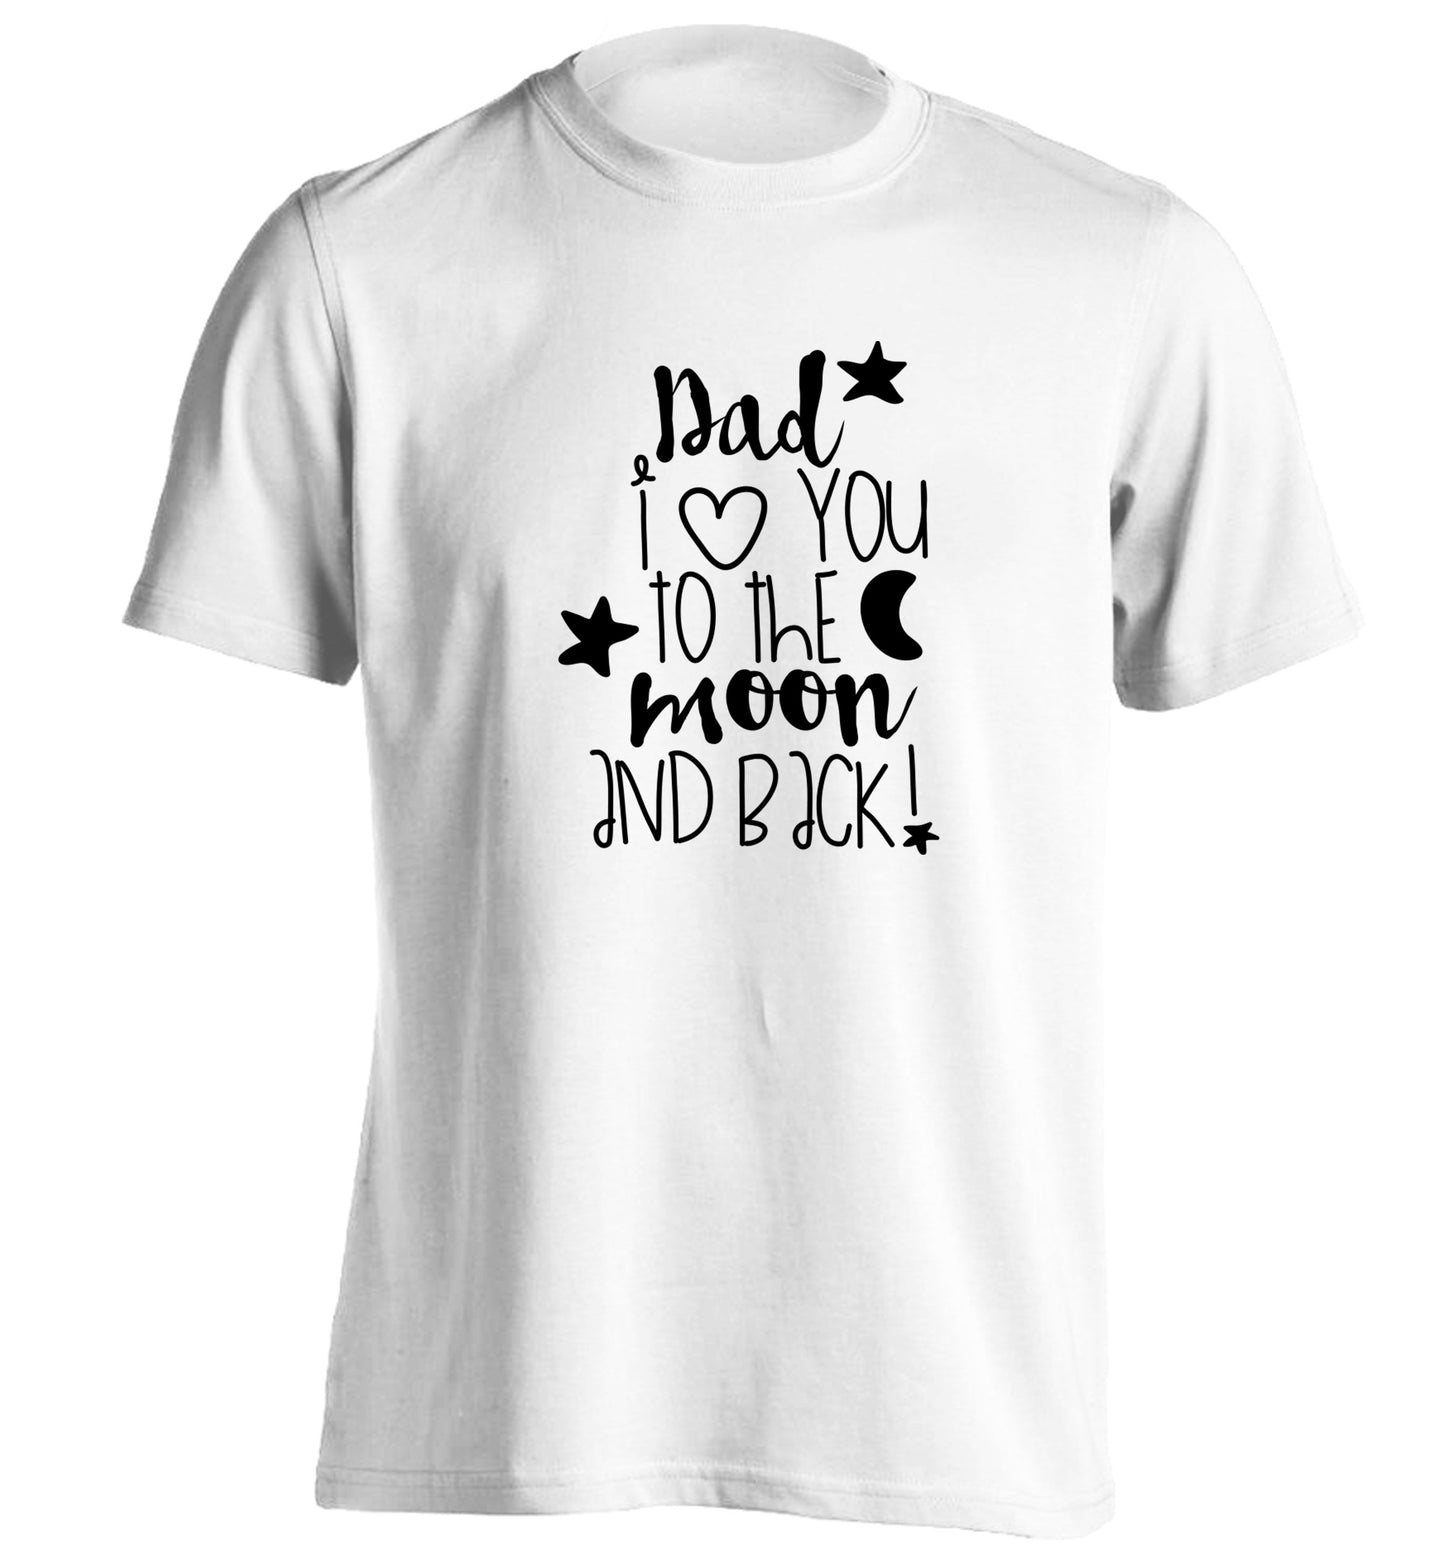 Dad I love you to the moon and back adults unisex white Tshirt 2XL